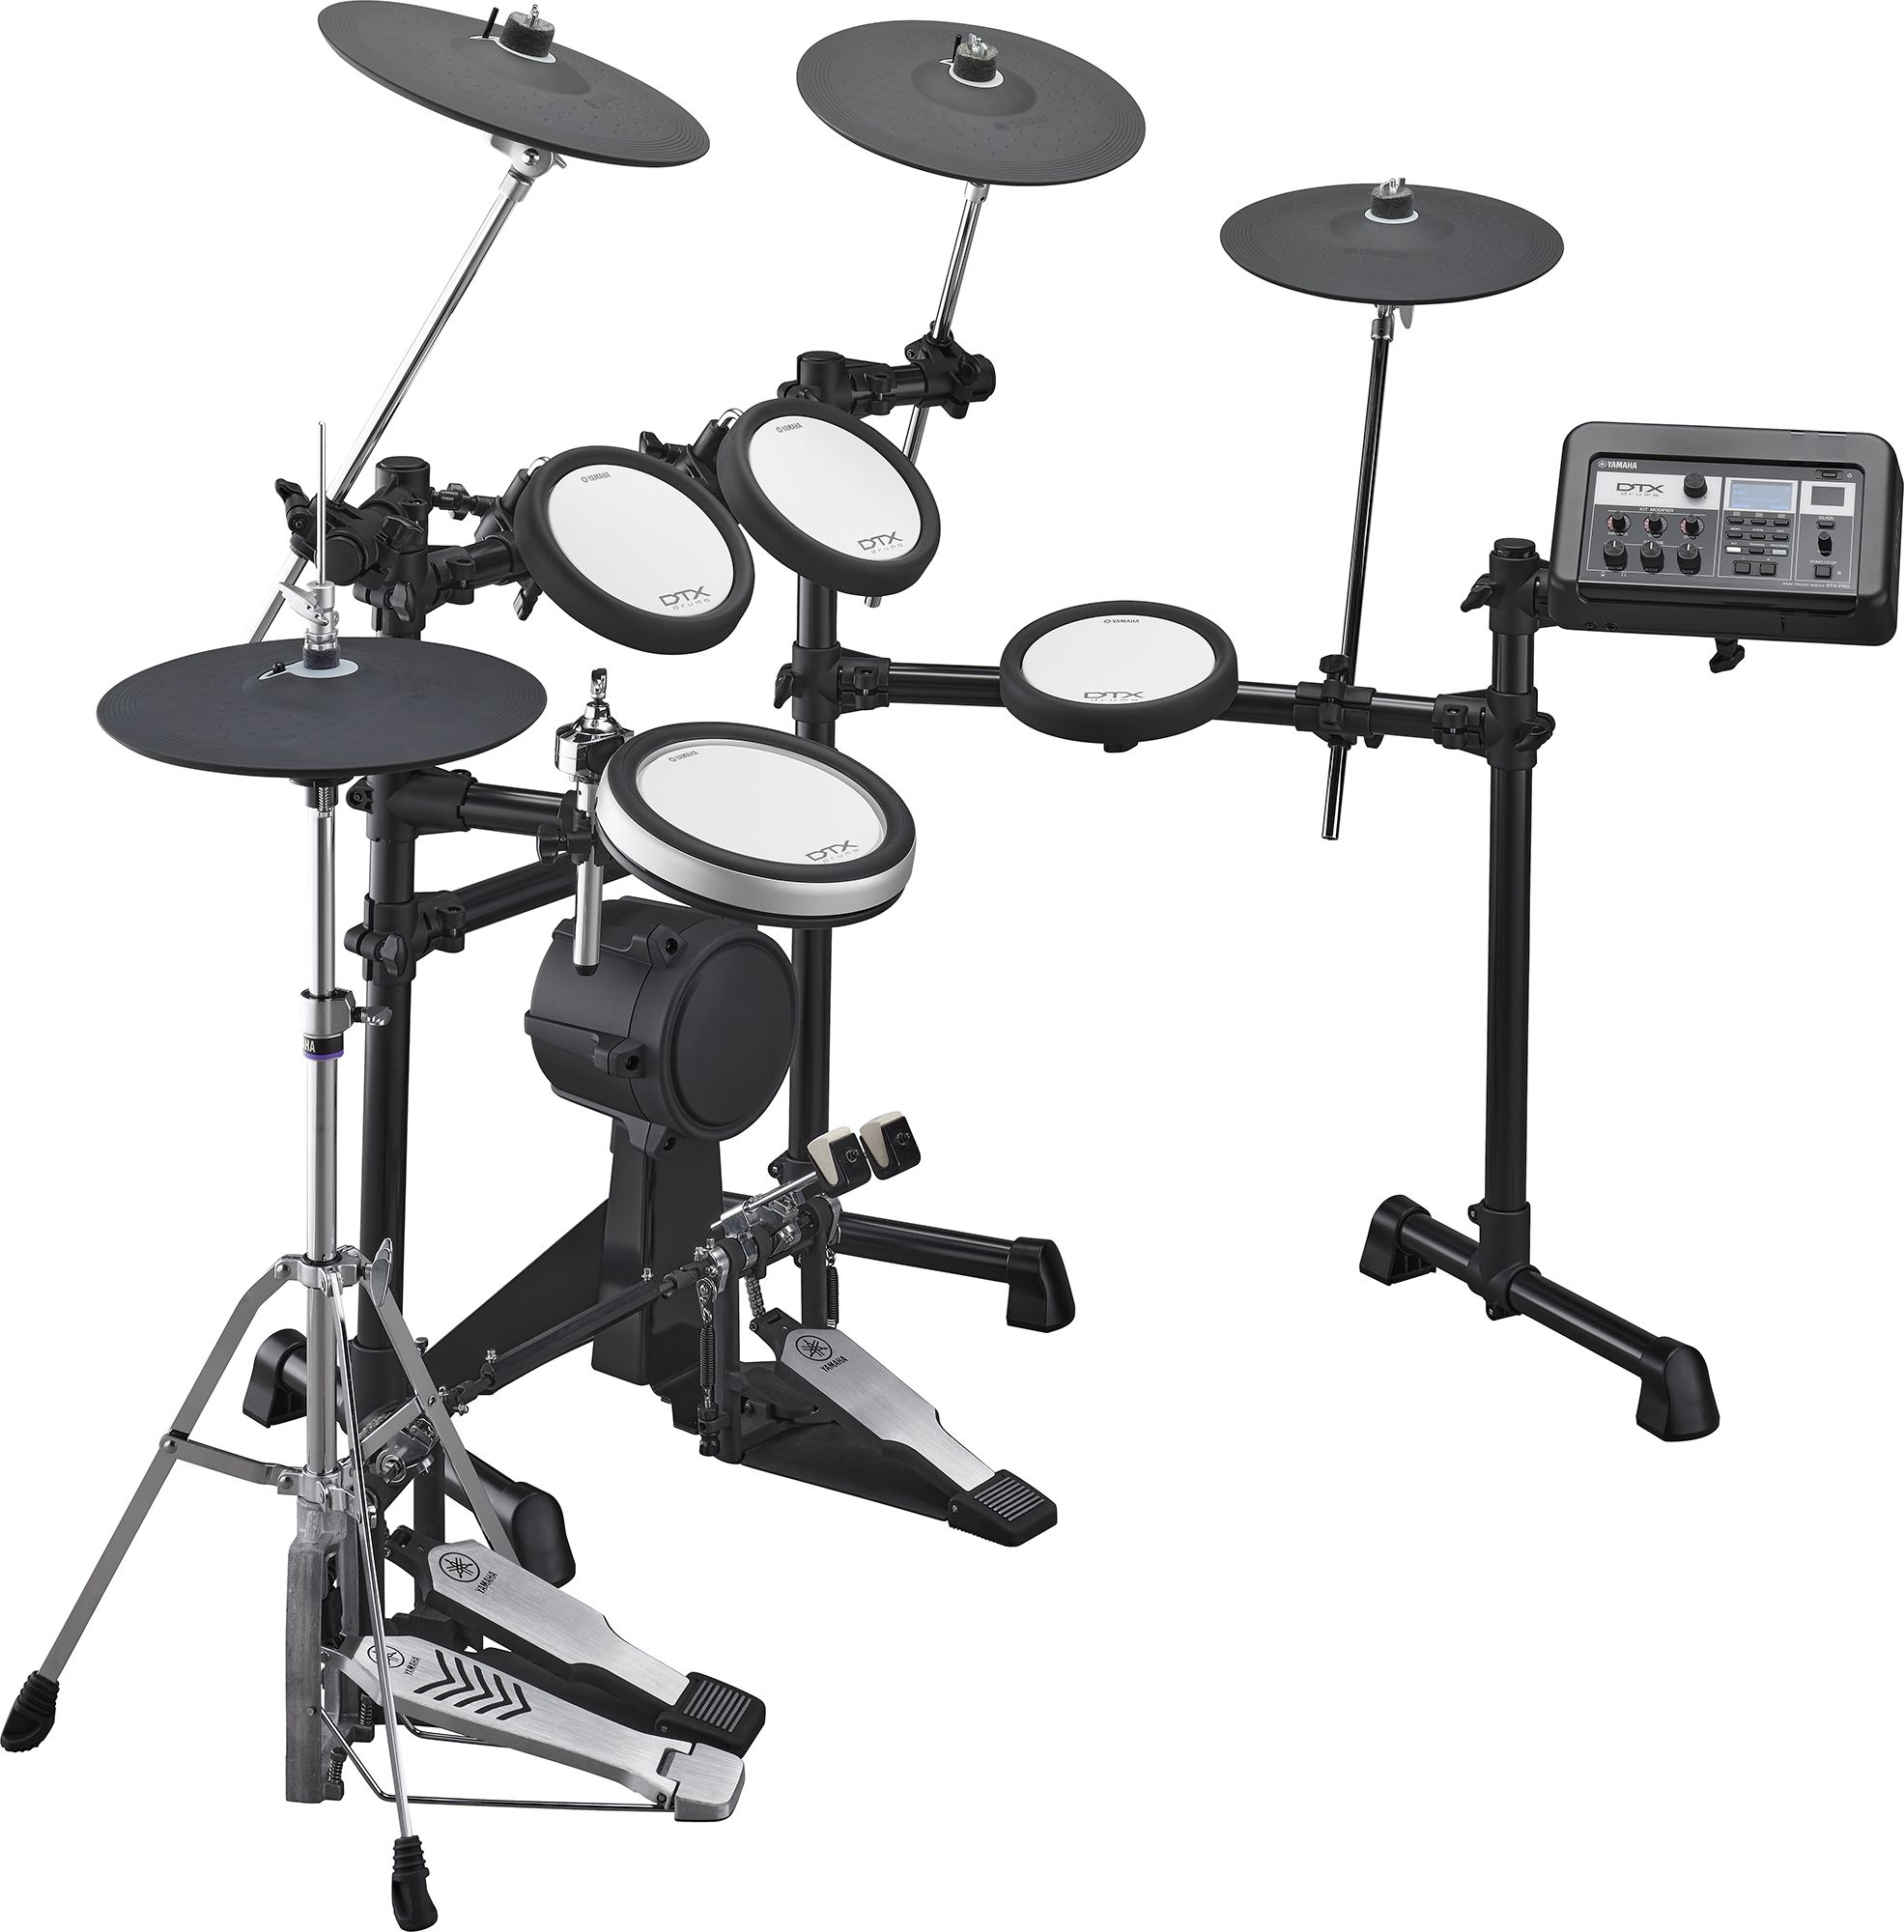 DTX6 Series - Products - Electronic Drum Kits - Electronic Drums 